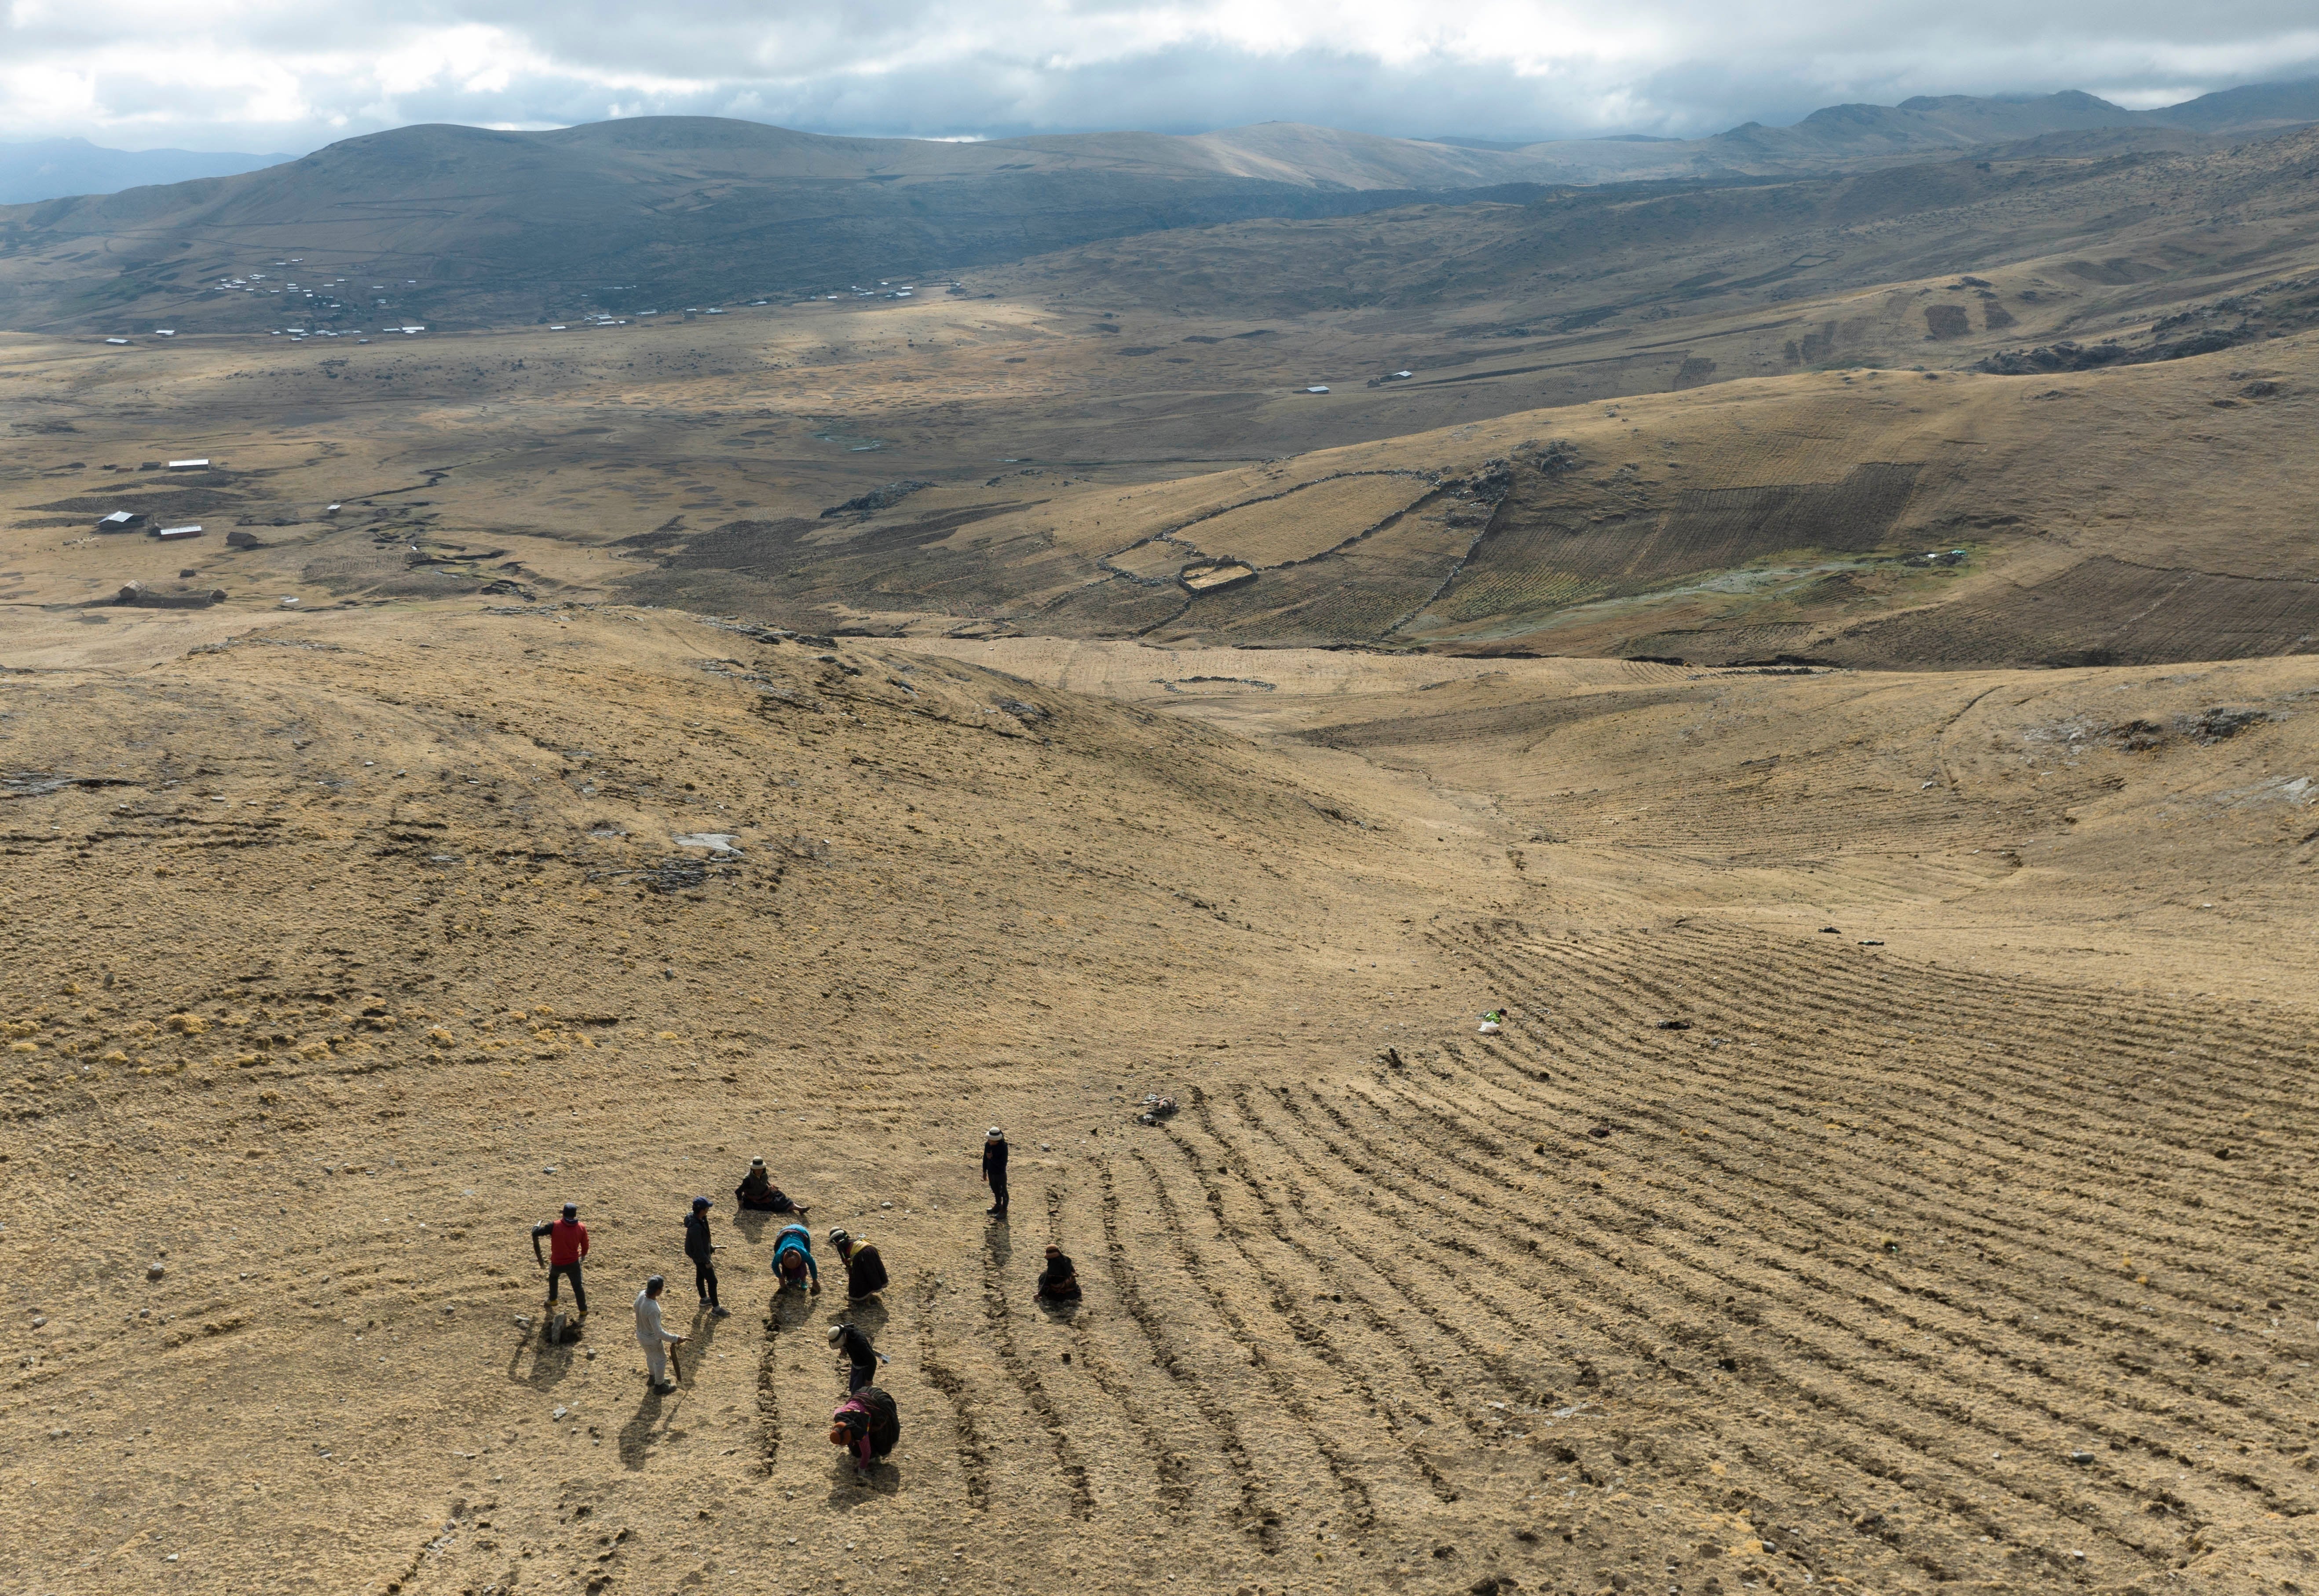 Residents harvest potatoes in a field near the Cconchaccota lagoon. (Photo: Guadalupe Pardo, AP)